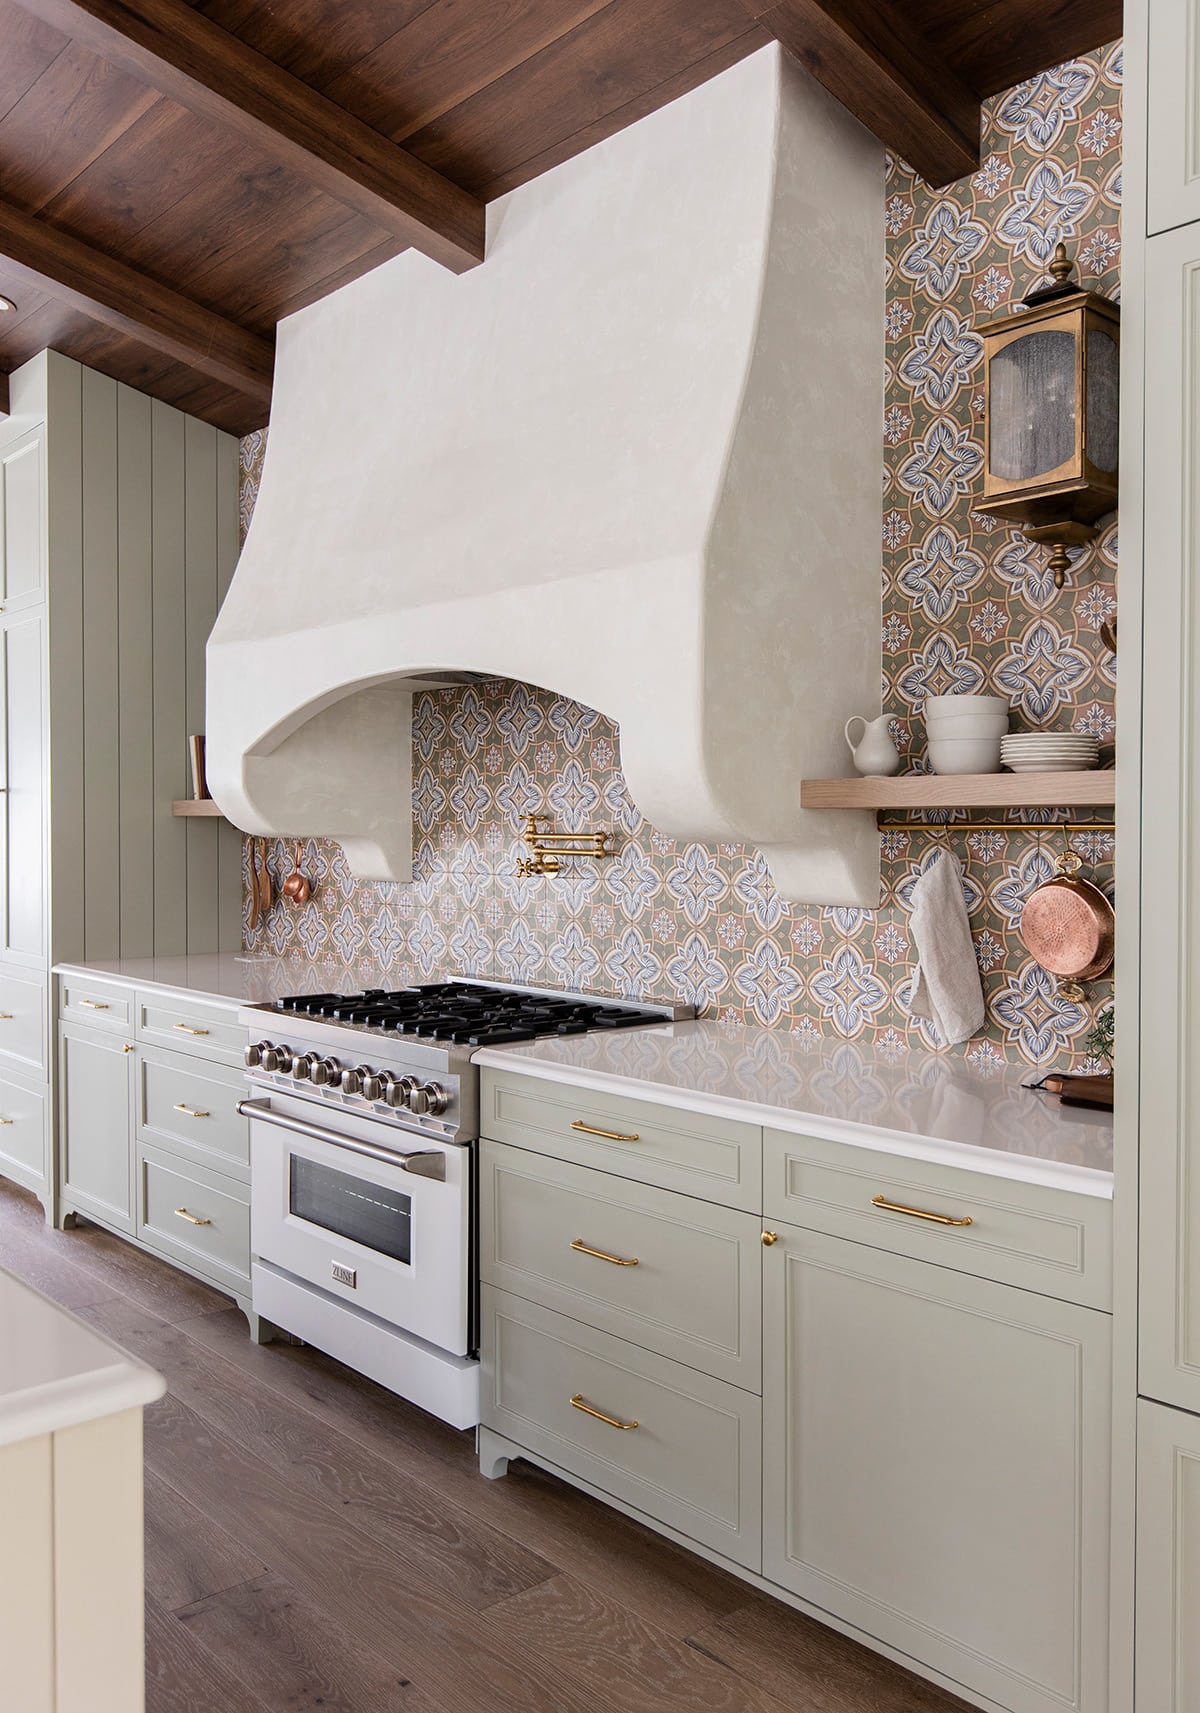 sage green kitchen cabinets and patterned tile